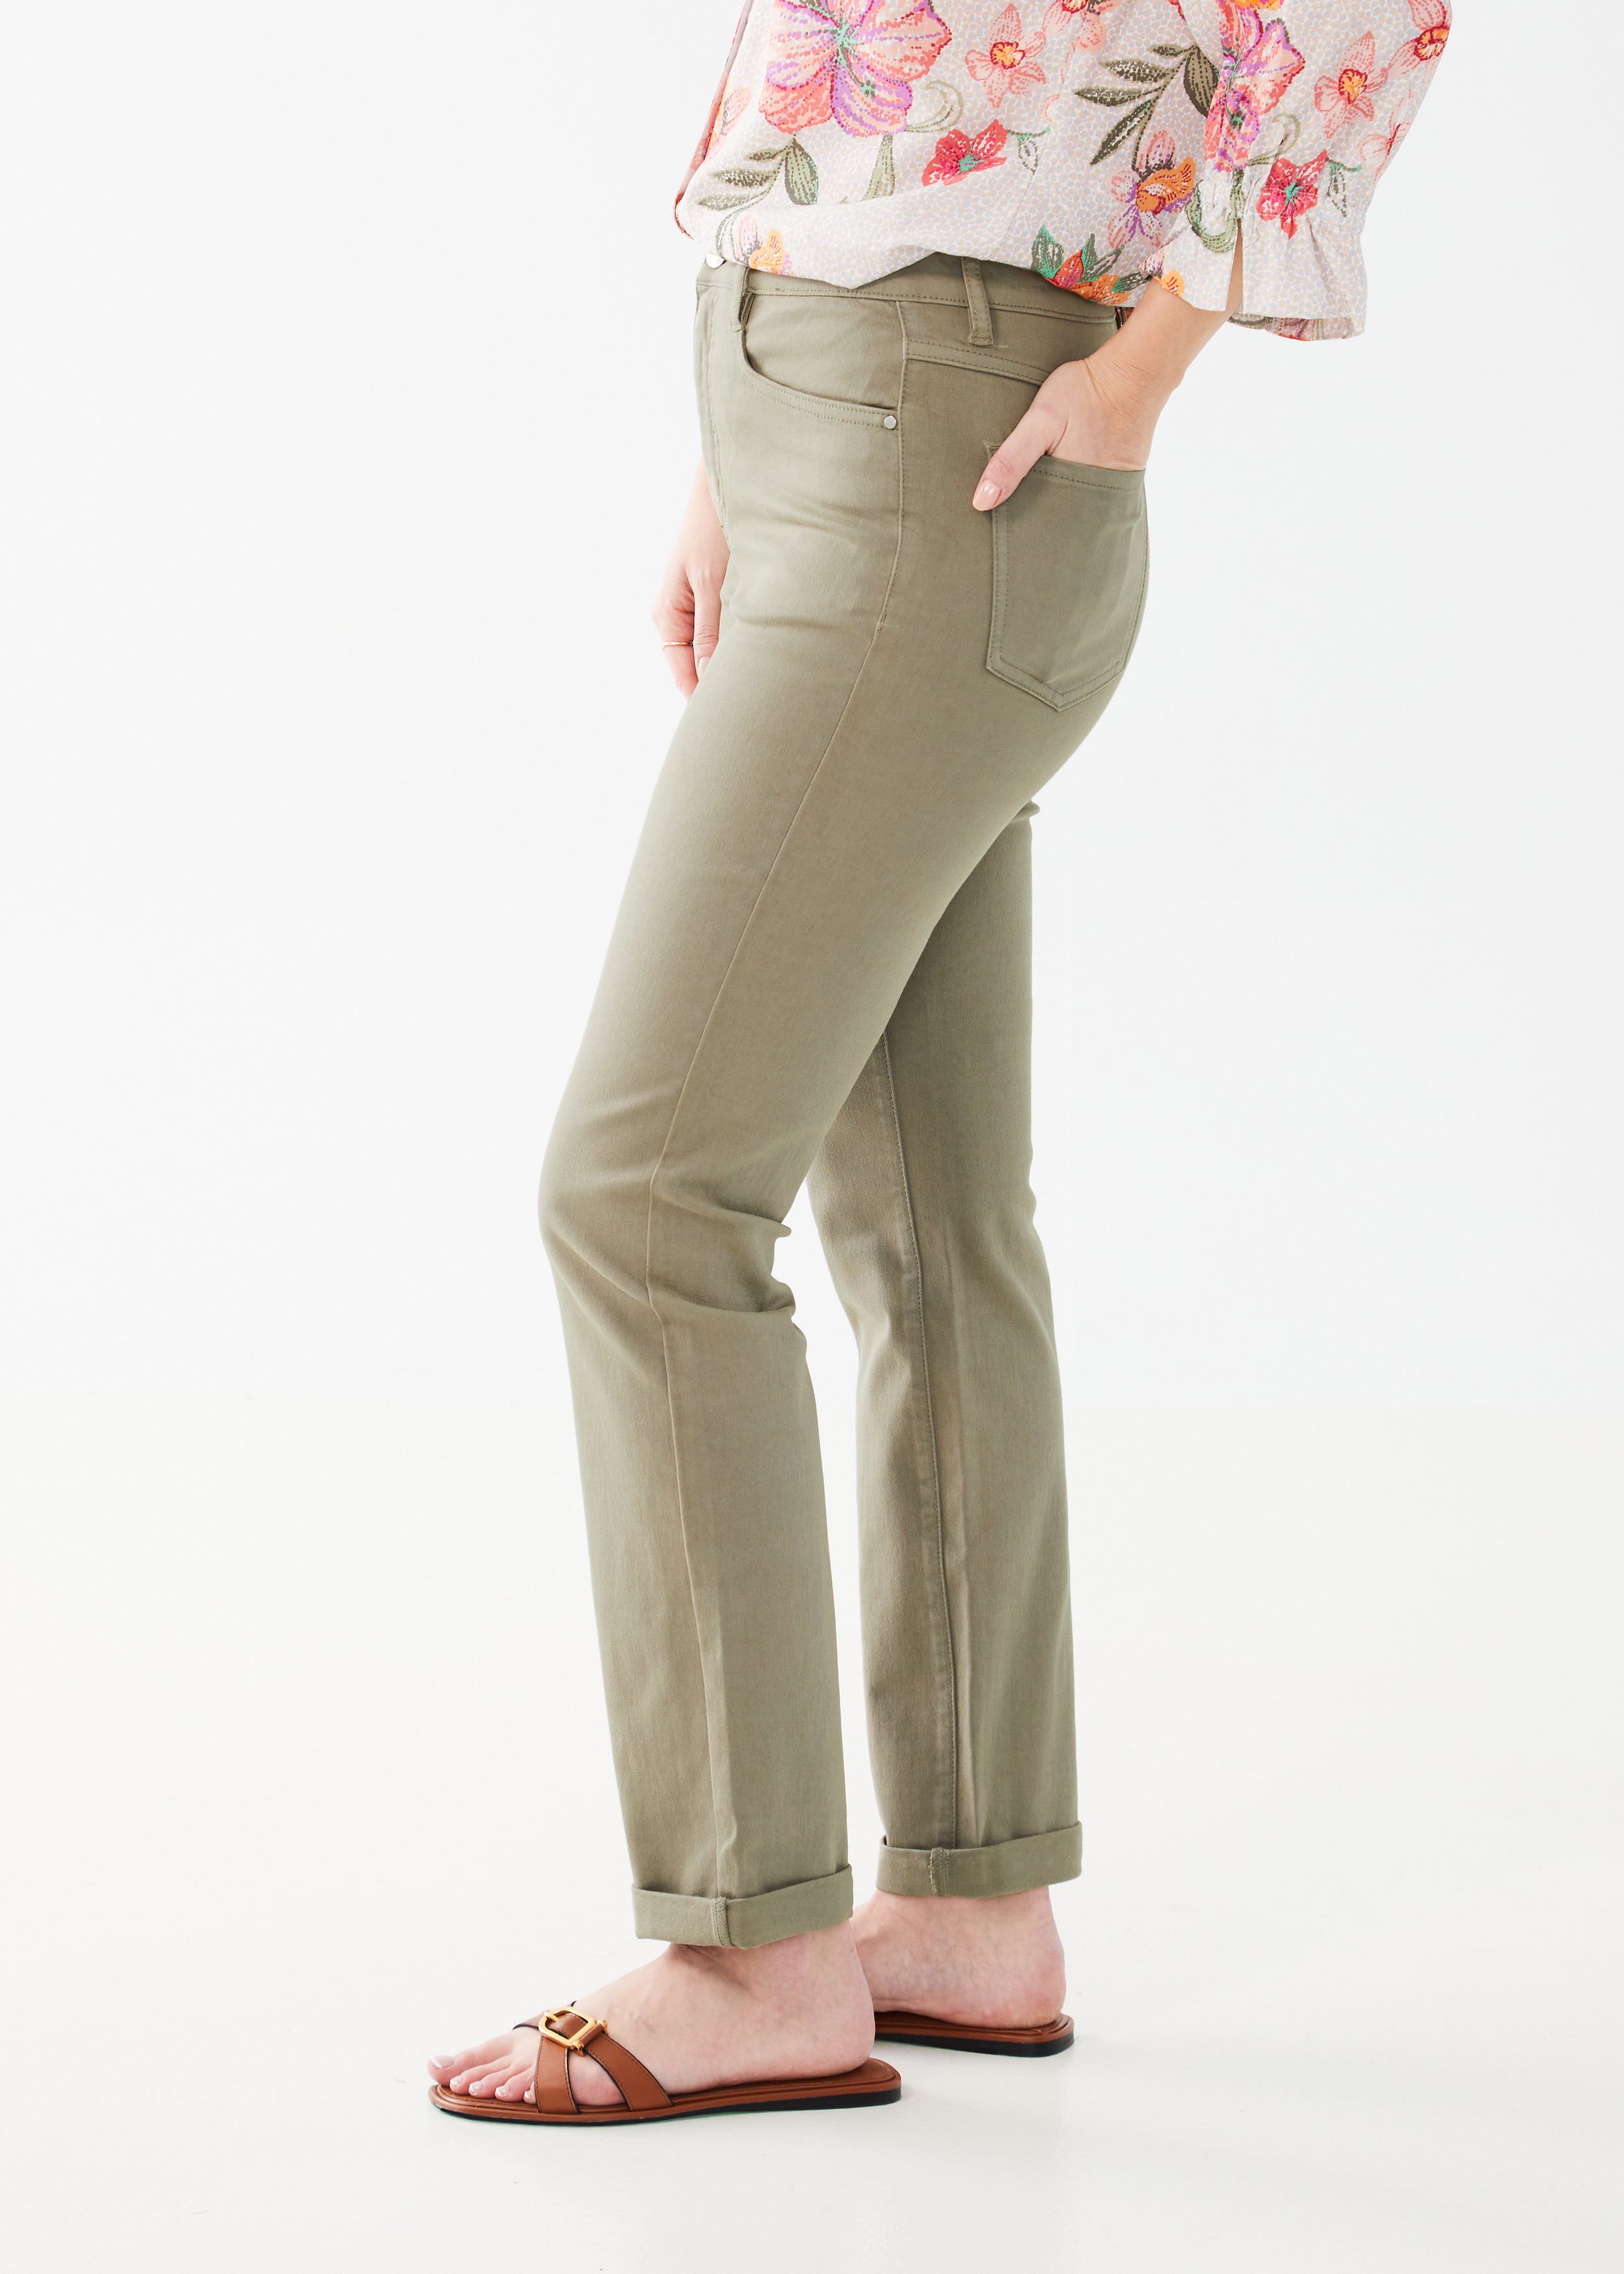 Introducing FDJ PETITE Suzanne Straight Leg jeans, featuring a flattering fit and versatile styling in Fern.